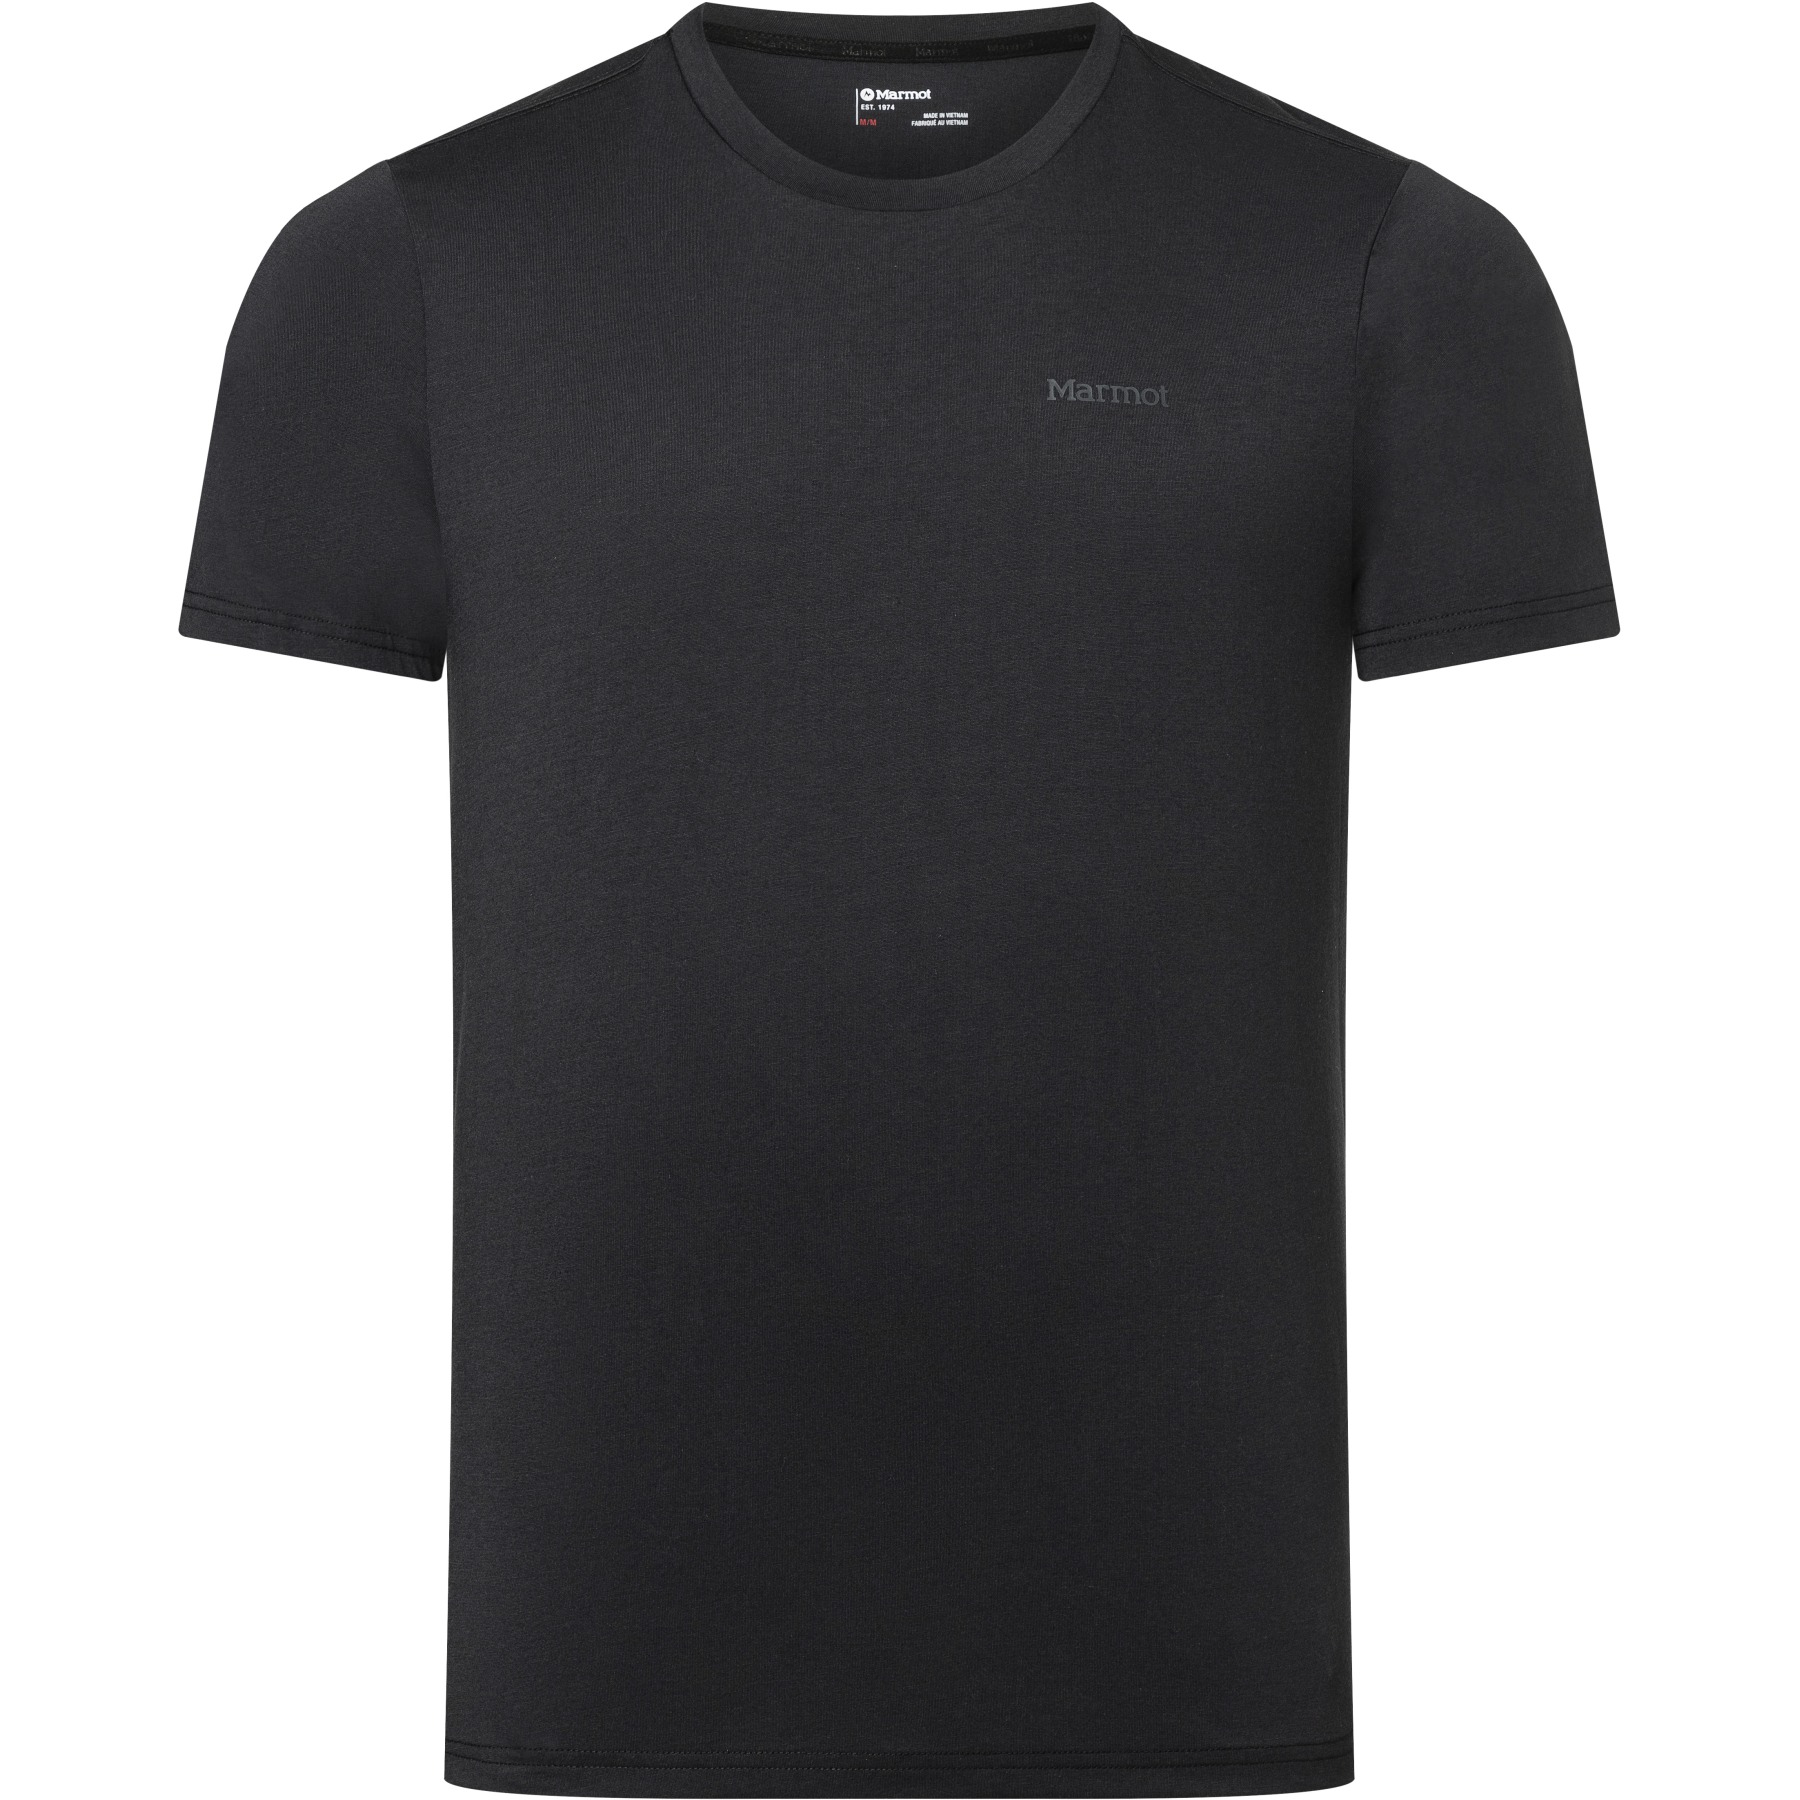 Picture of Marmot Crossover Short Sleeve Tee - black